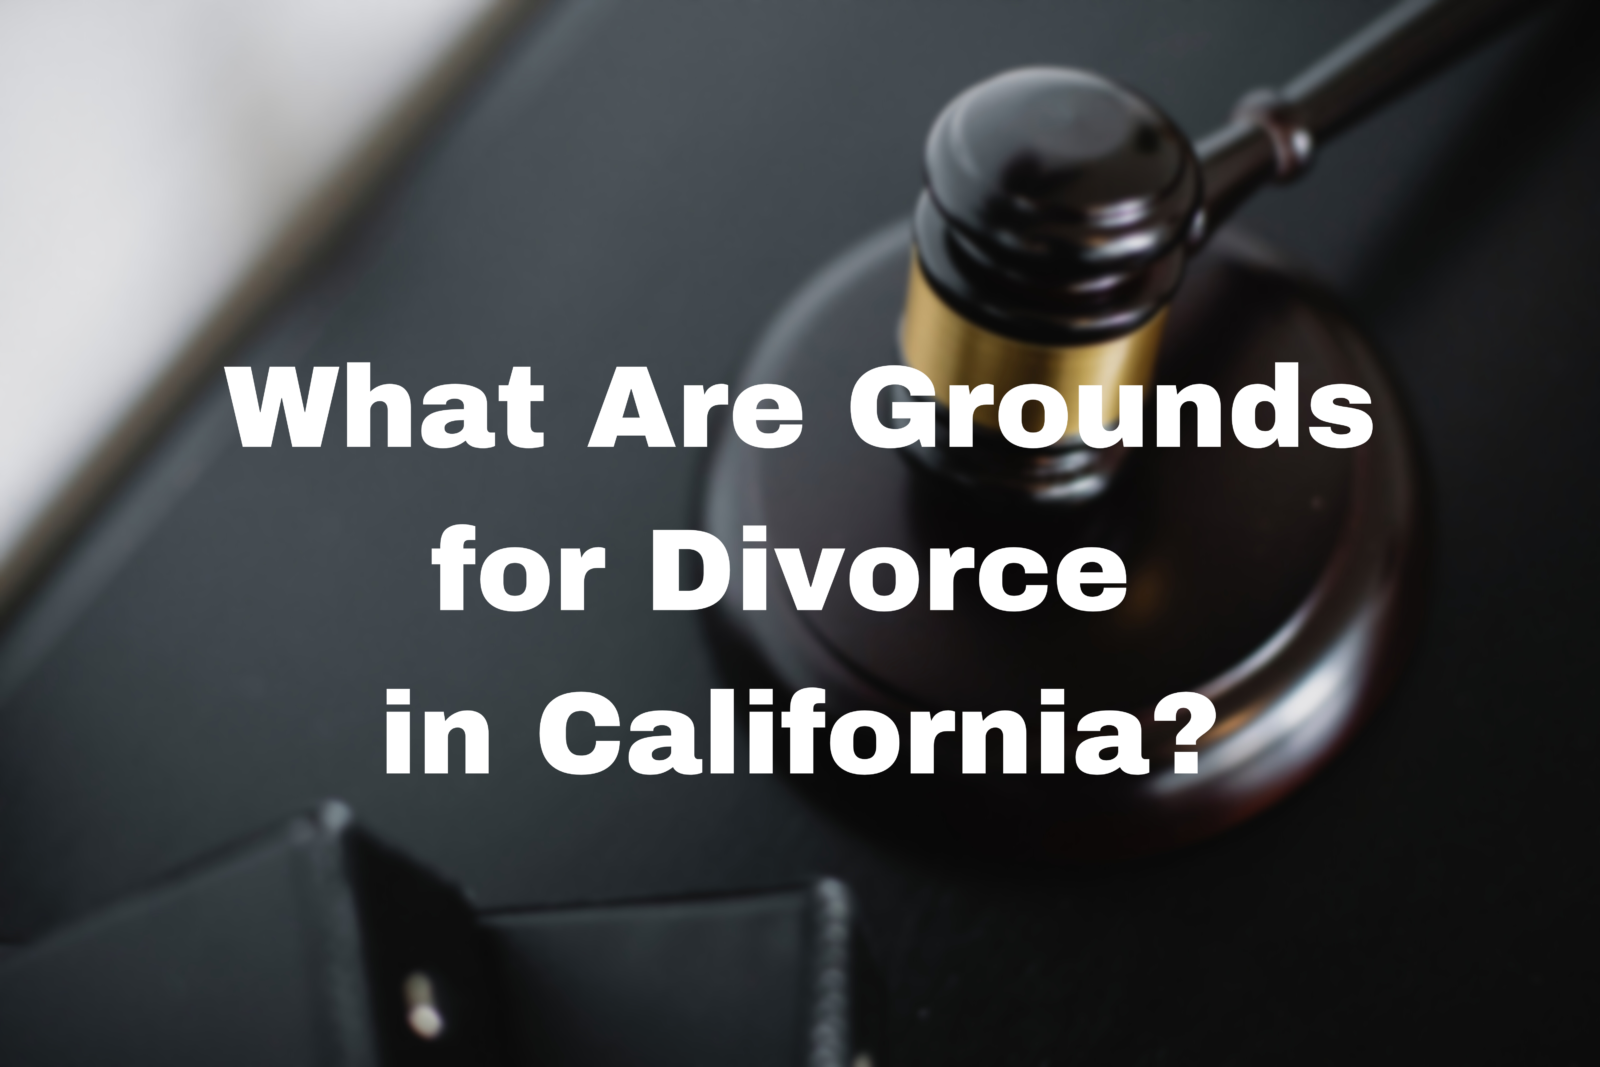 Stock image with text: "What Are Grounds for Divorce in California?"